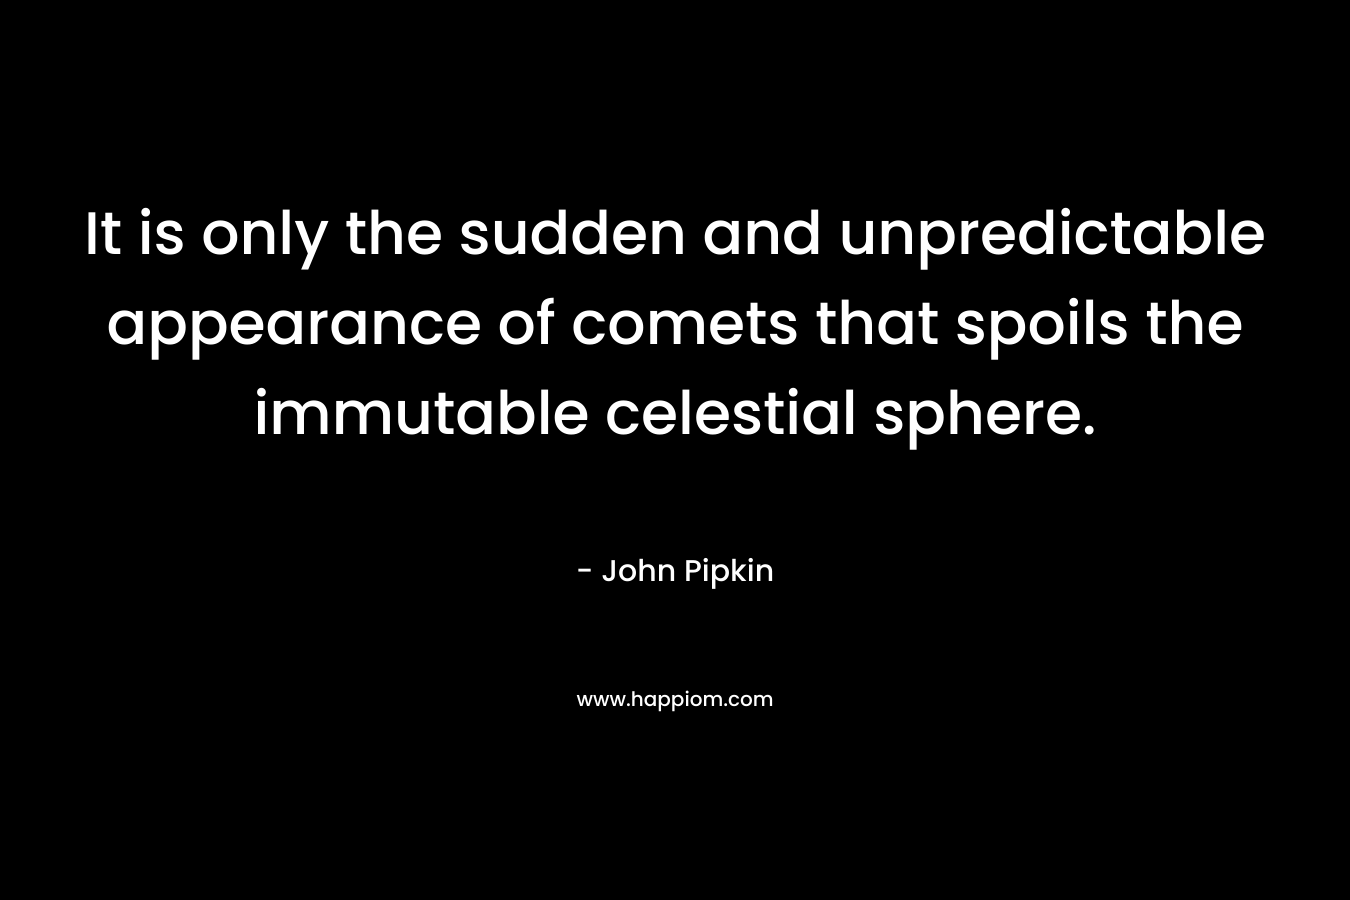 It is only the sudden and unpredictable appearance of comets that spoils the immutable celestial sphere. – John Pipkin